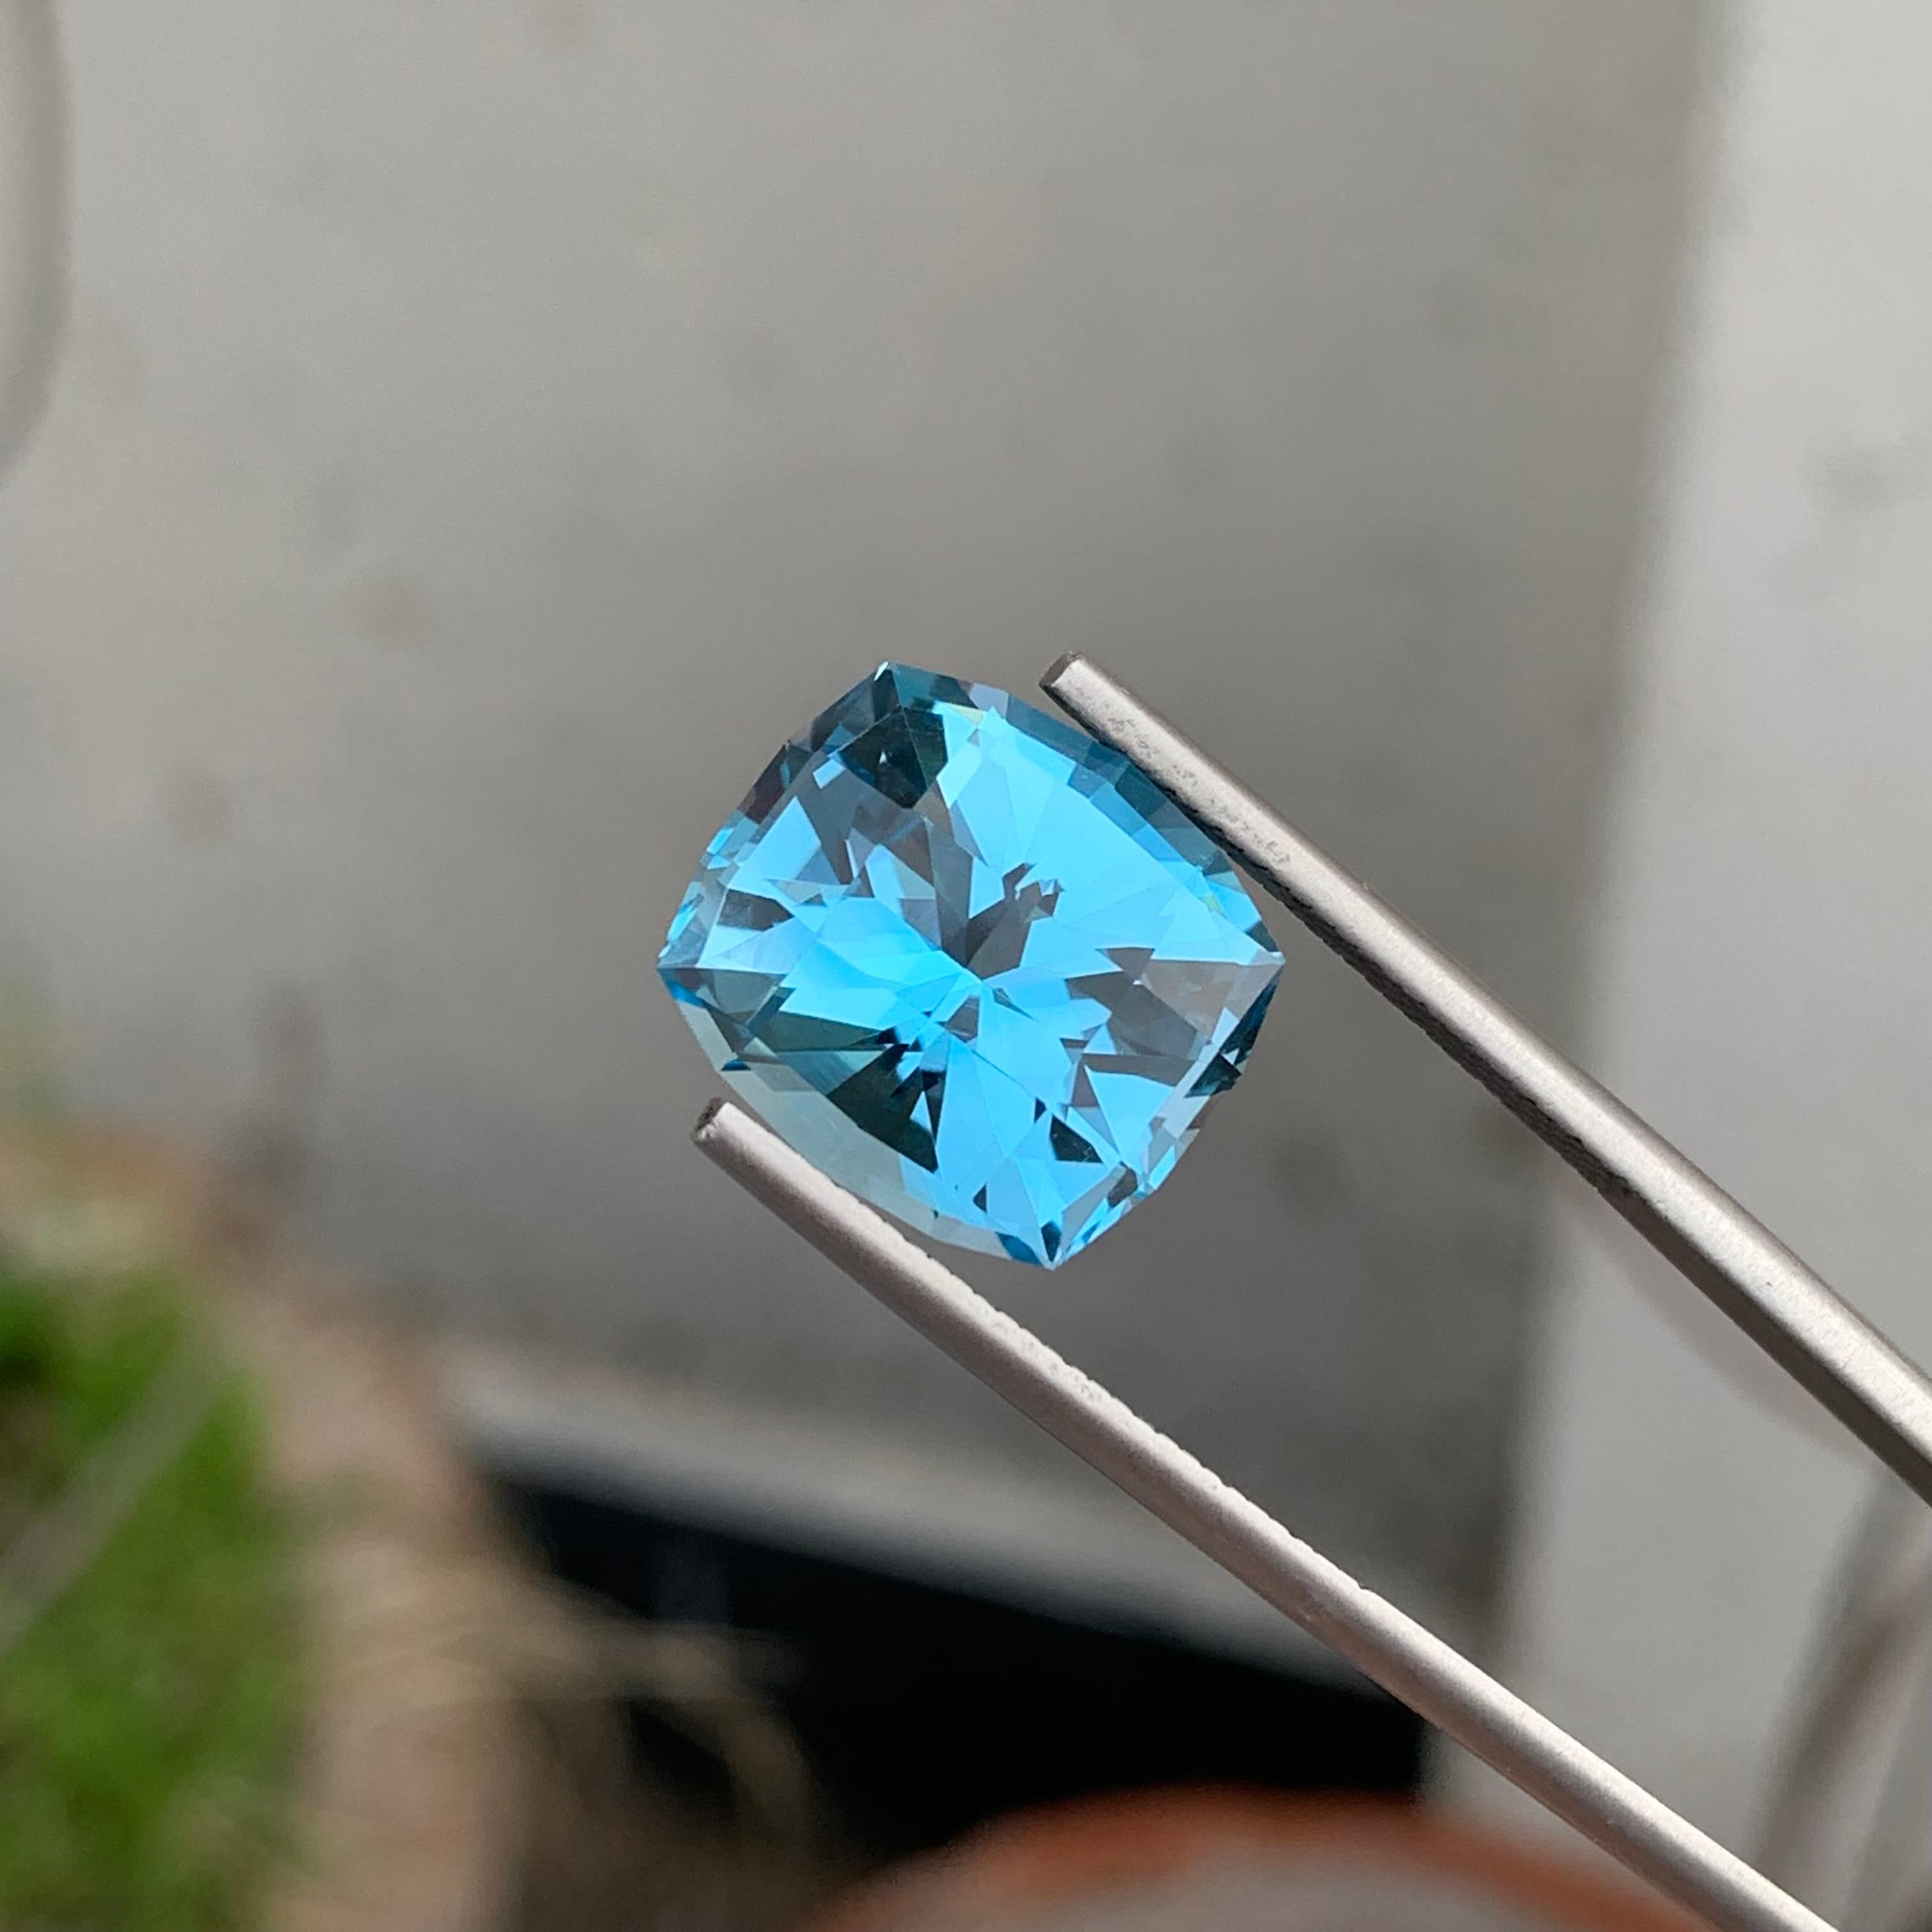 12.15 Carat Fancy Cut Faceted Sky Blue Topaz Gemstone For Jewellery Making  For Sale 3